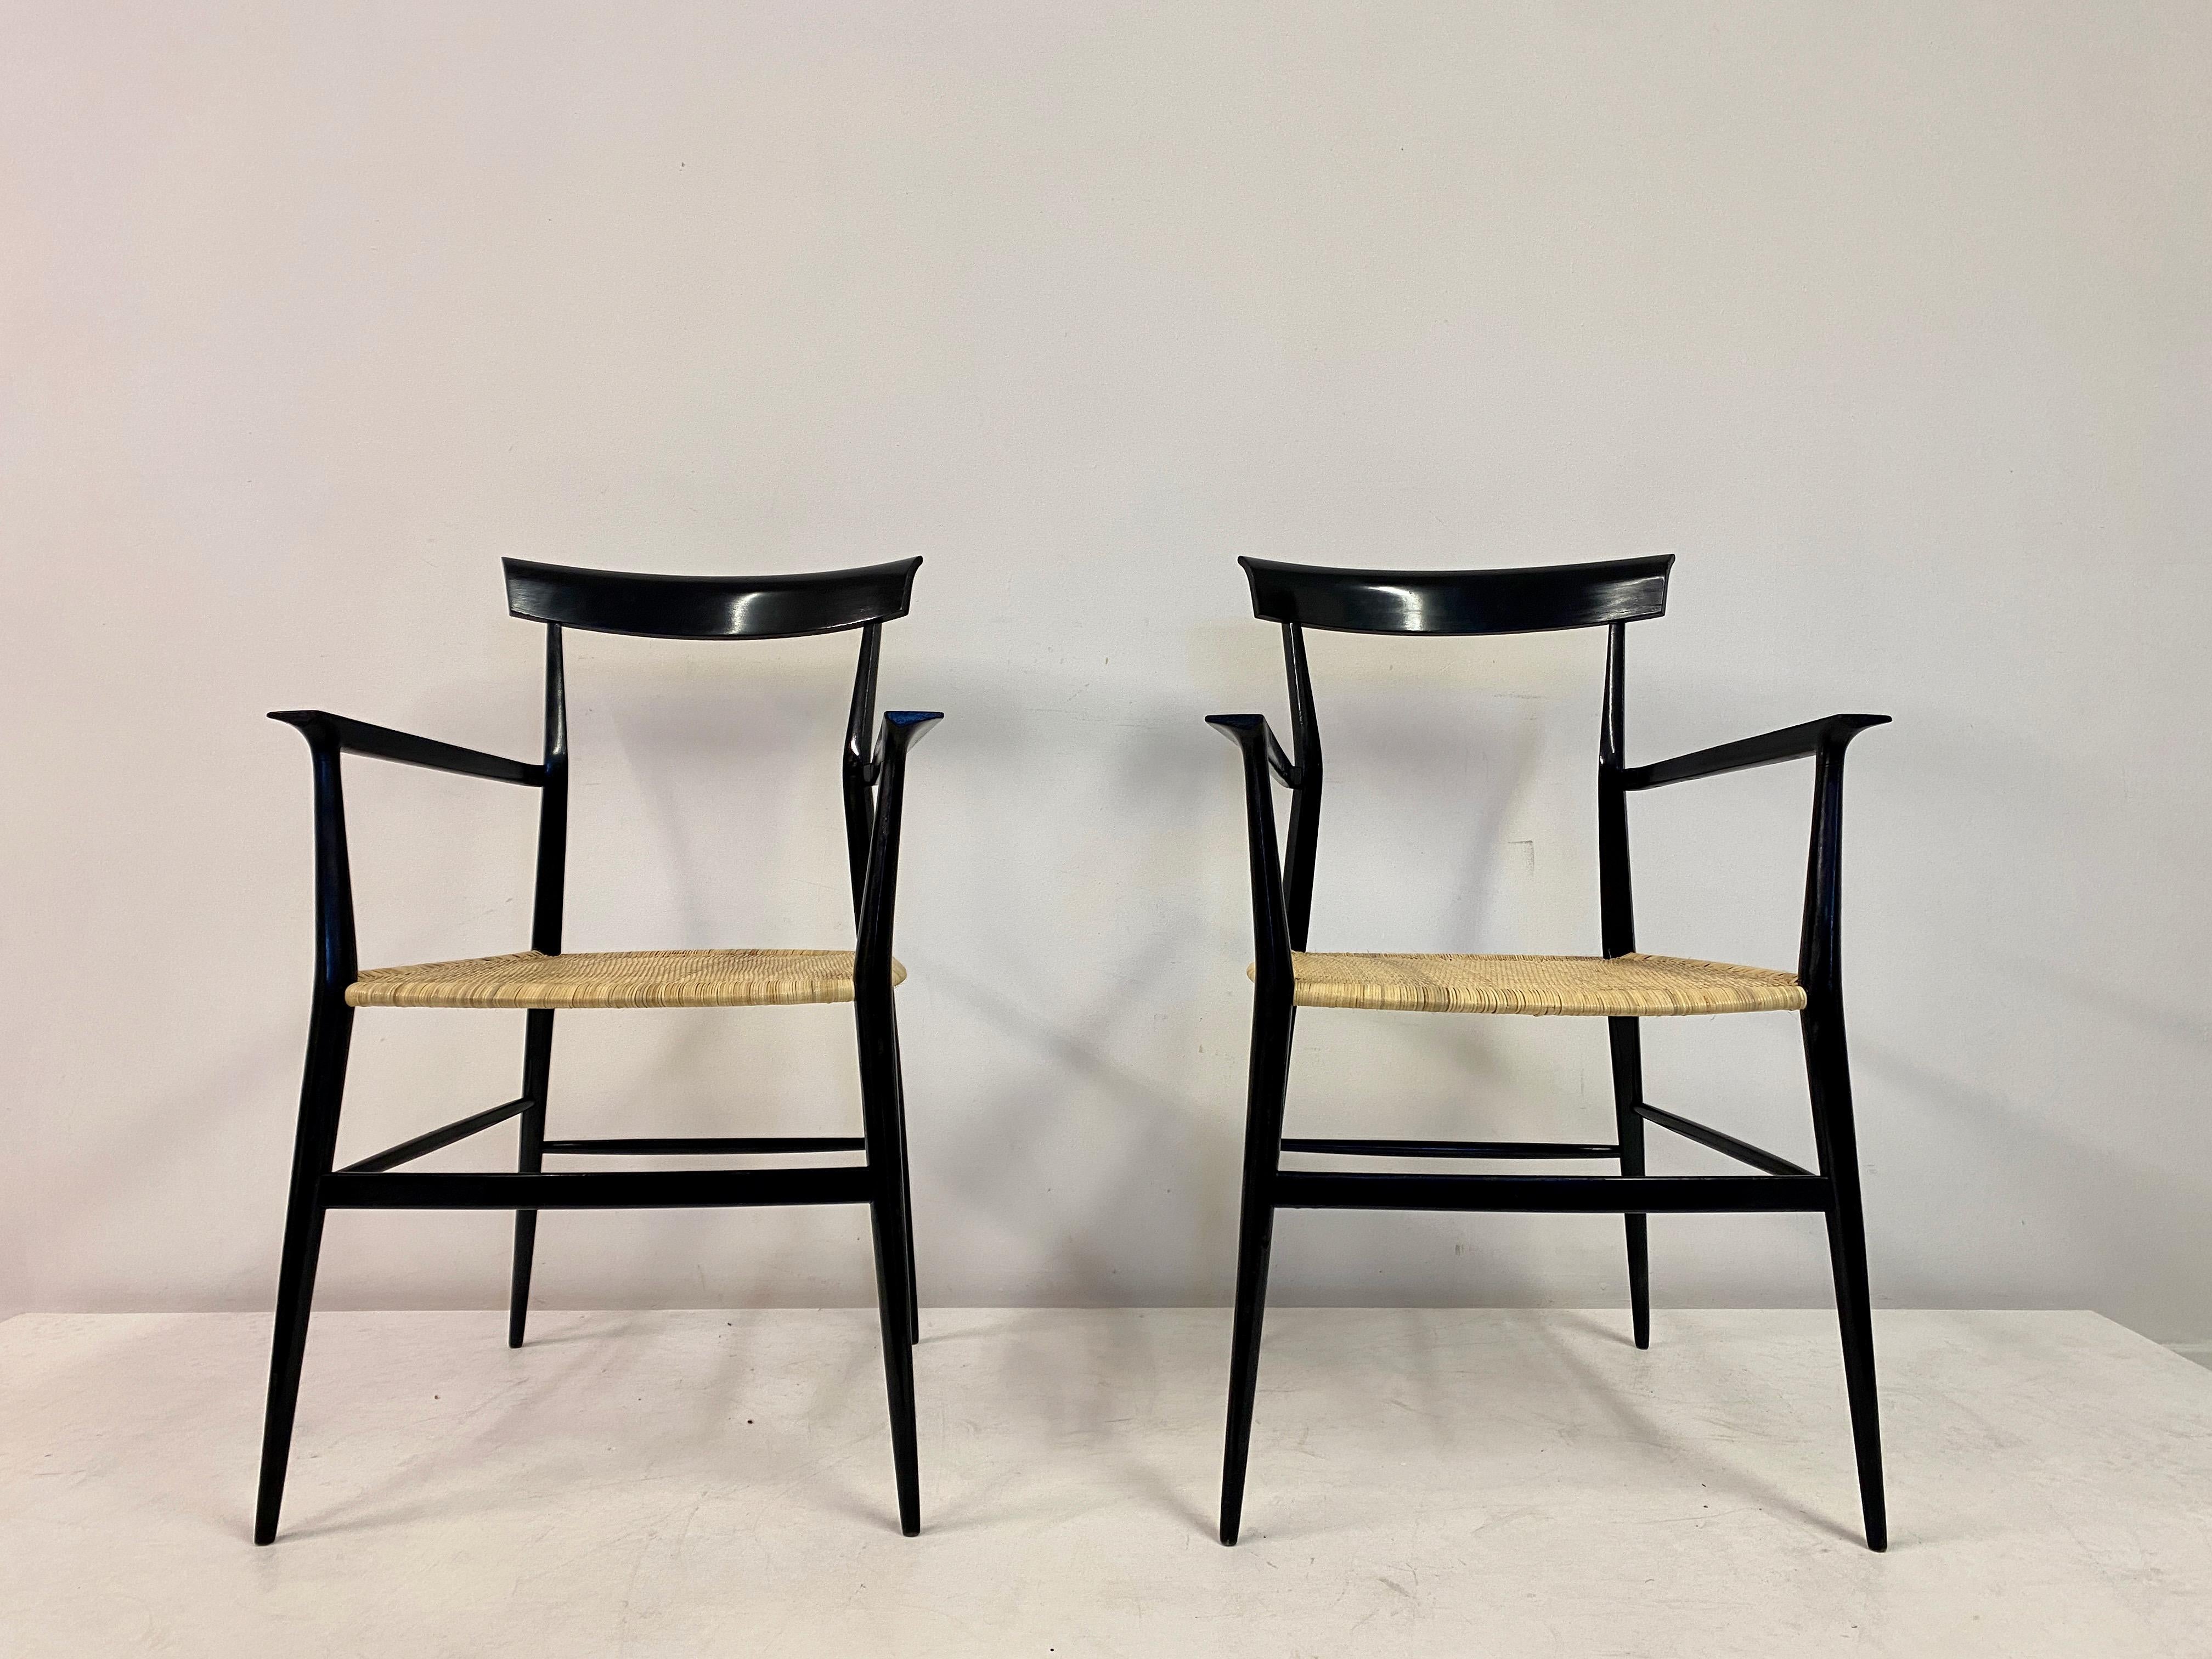 Pair of armchairs

Tigullina model

By Colombo Sanguineti

Black lacquered beech

New woven reeded seats 

Slender frame and extremely light

On round in section legs.

 Back uprights with a deep overhanging back top splat

Flat arms